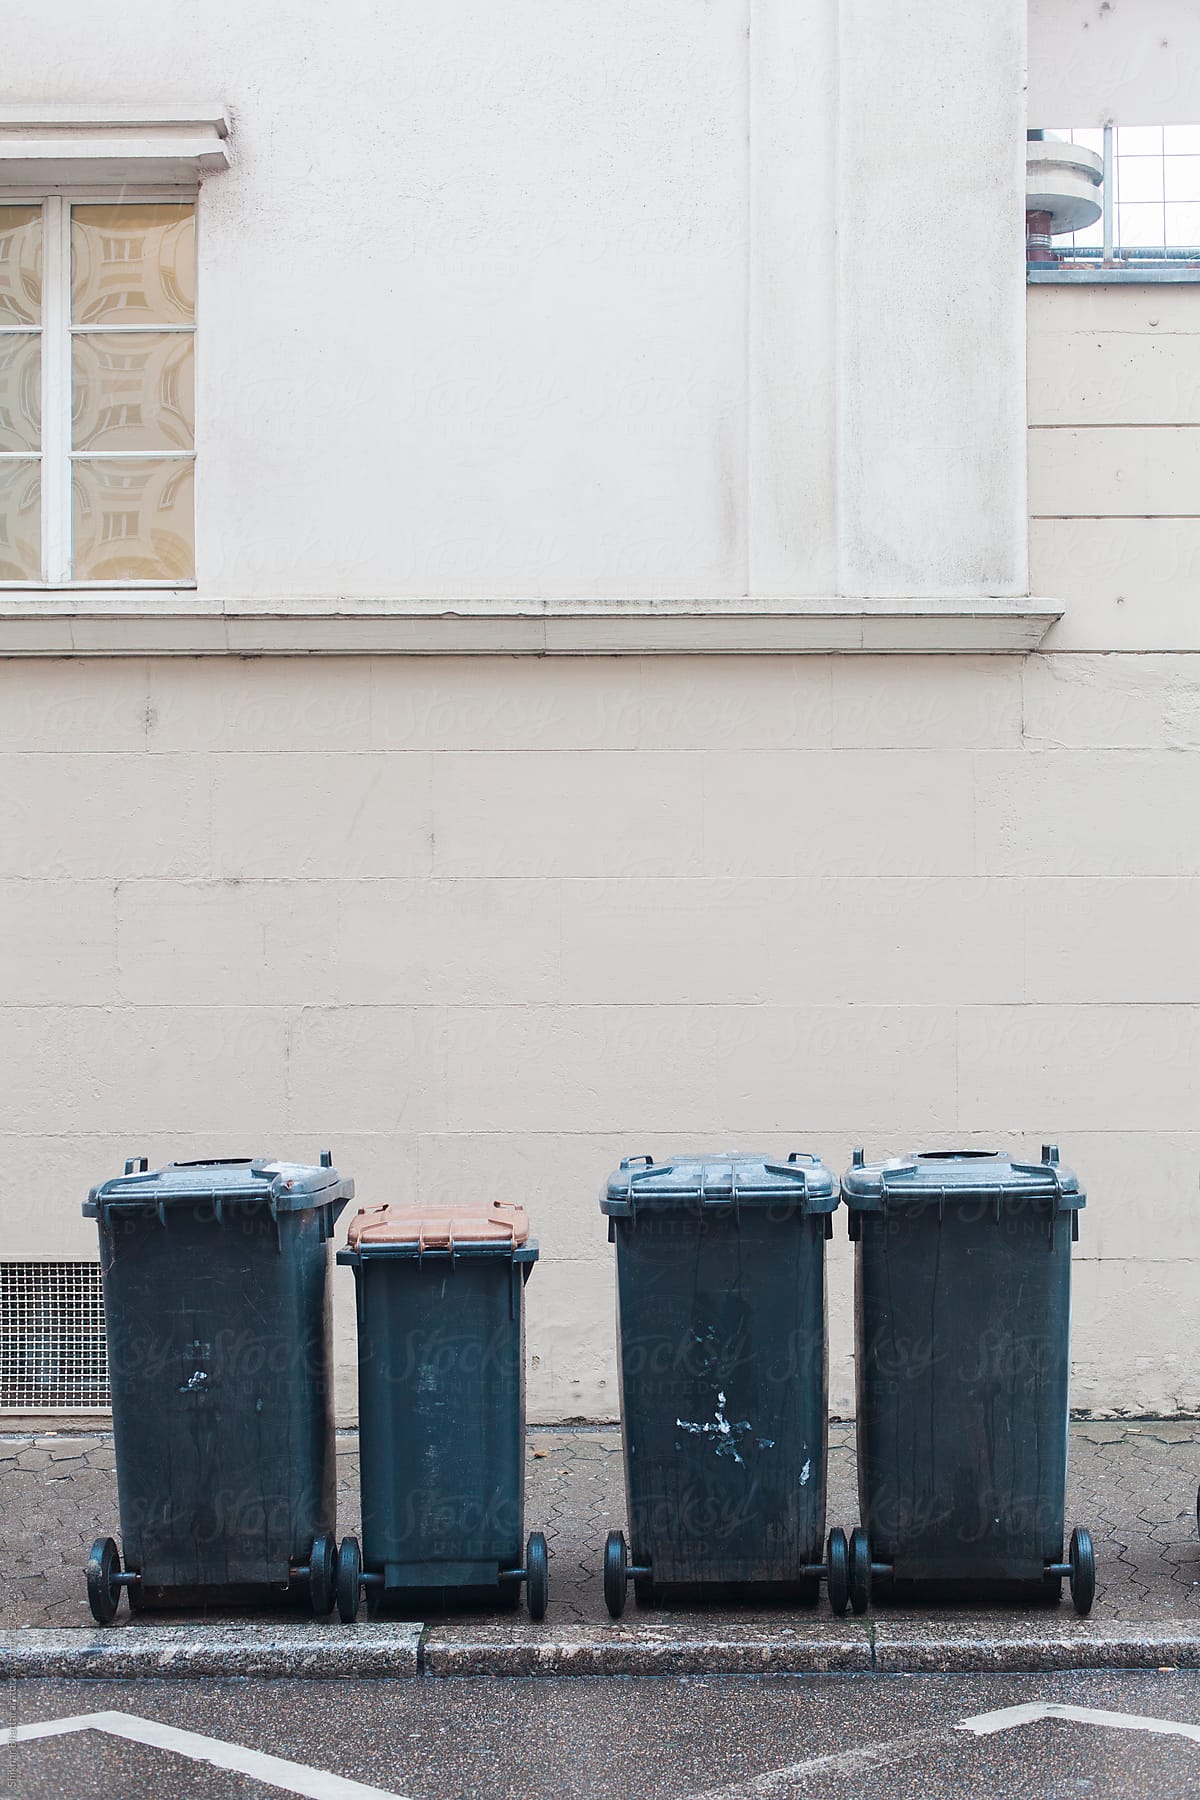 Four garbage bins against a wall in the street.